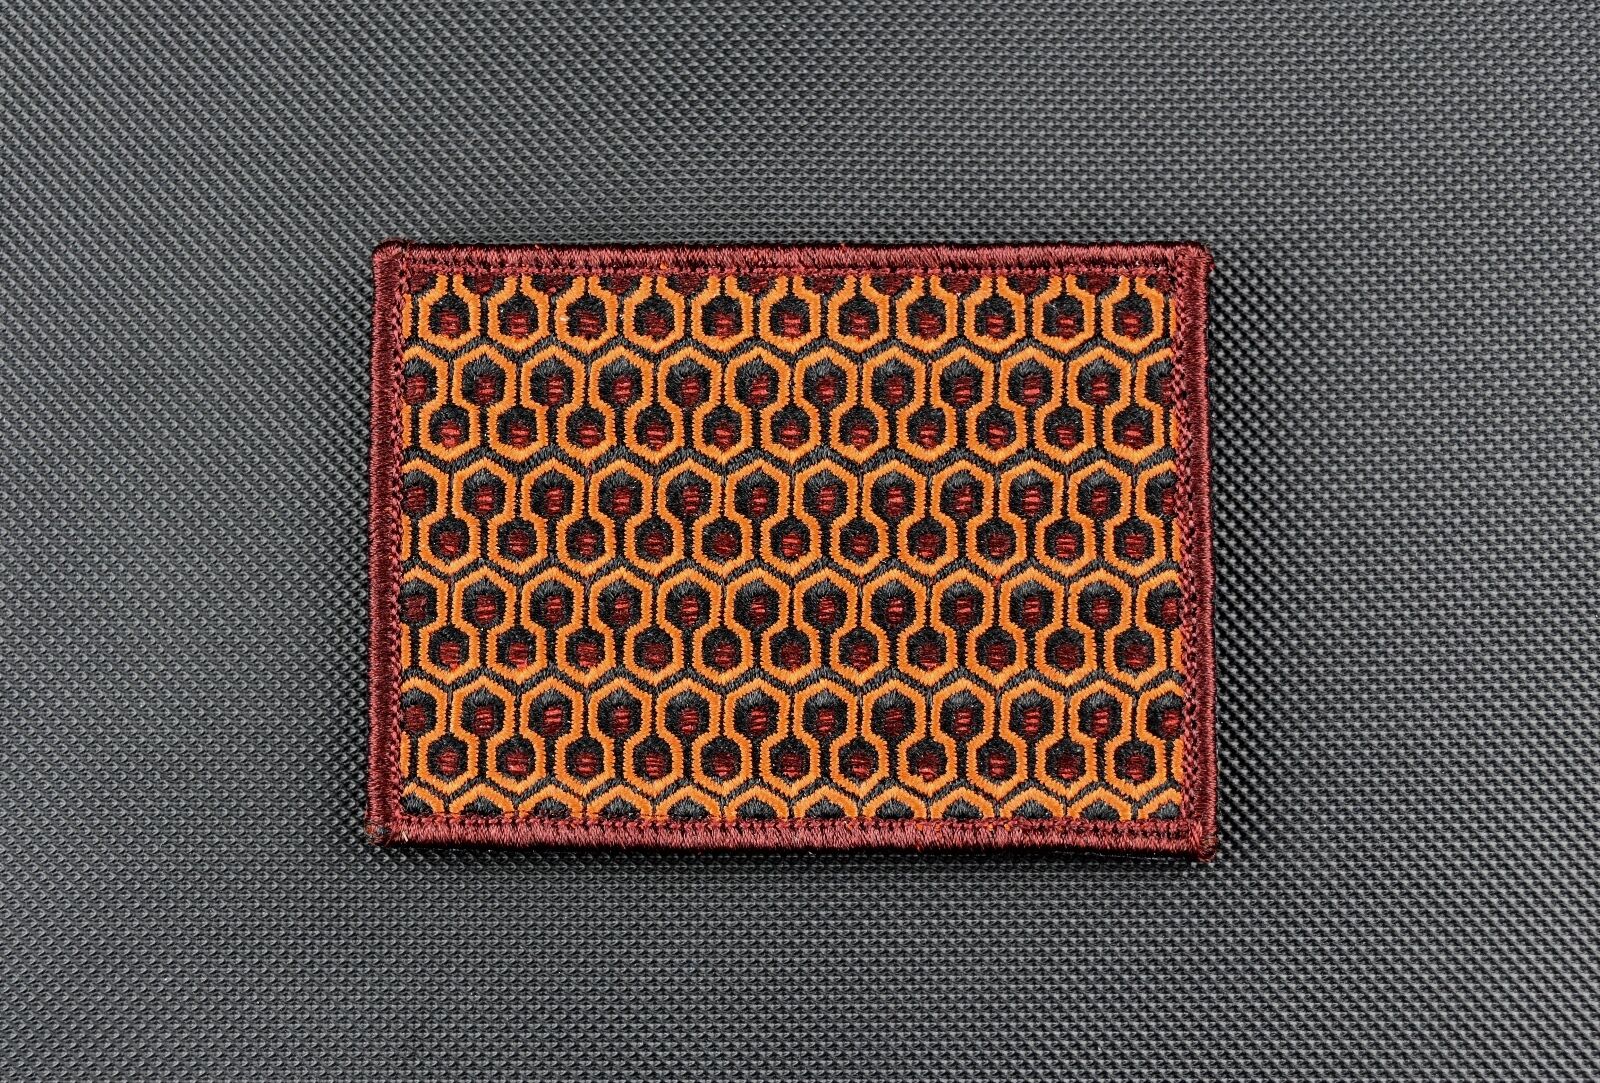 The Shining Overlook Hotel Carpet Embroidered Patch Redrum Stanley Kubrick Hook